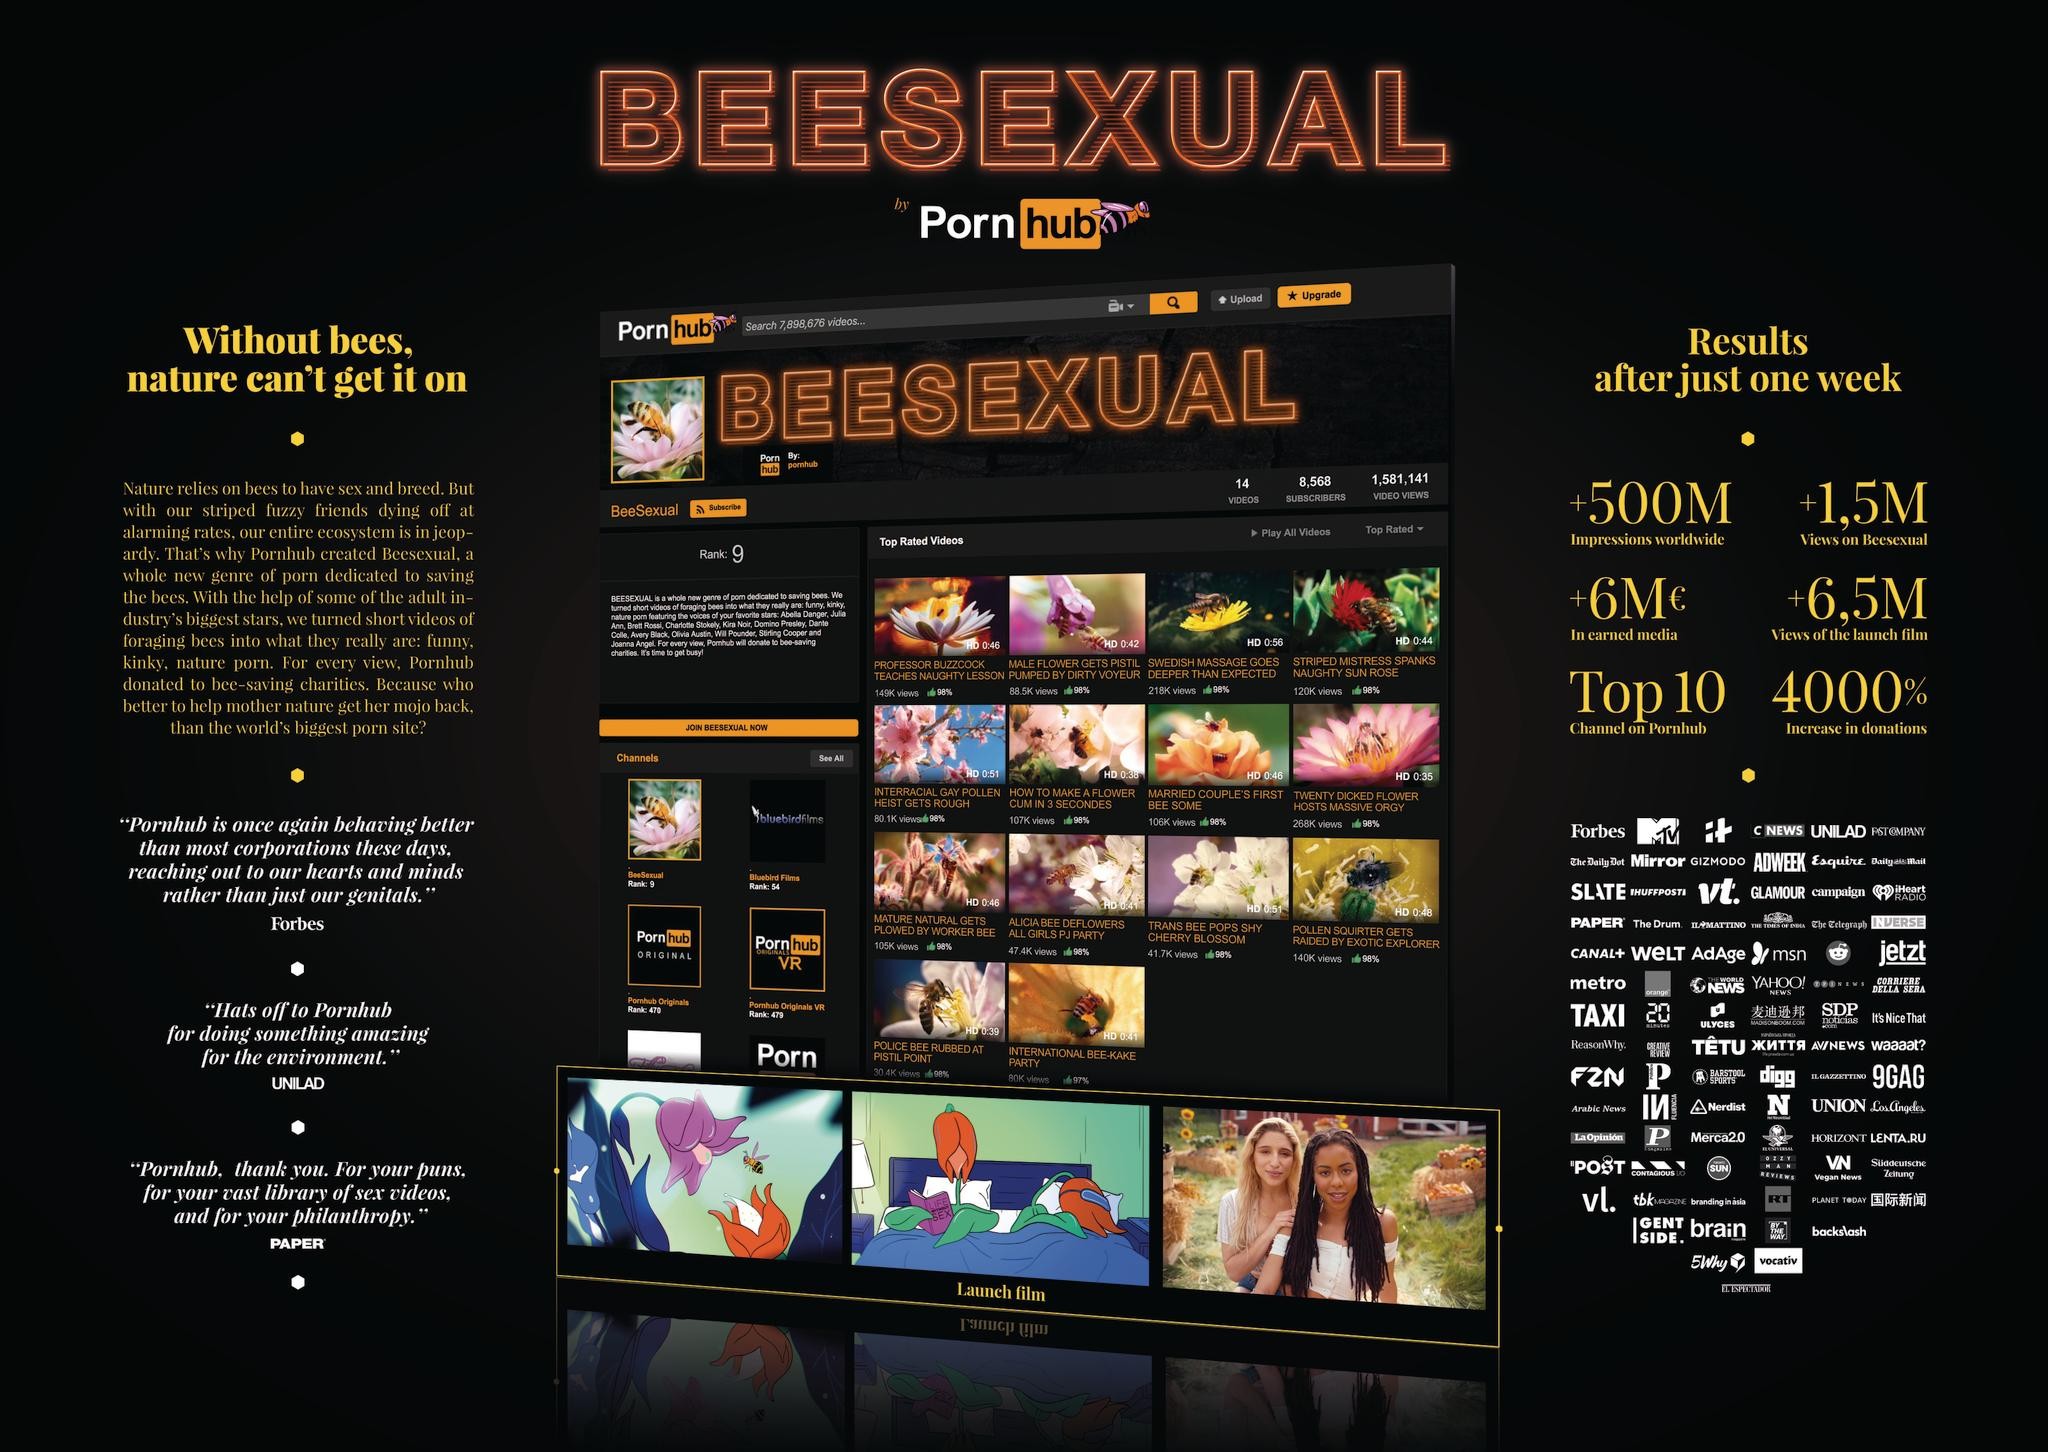 Beesexual